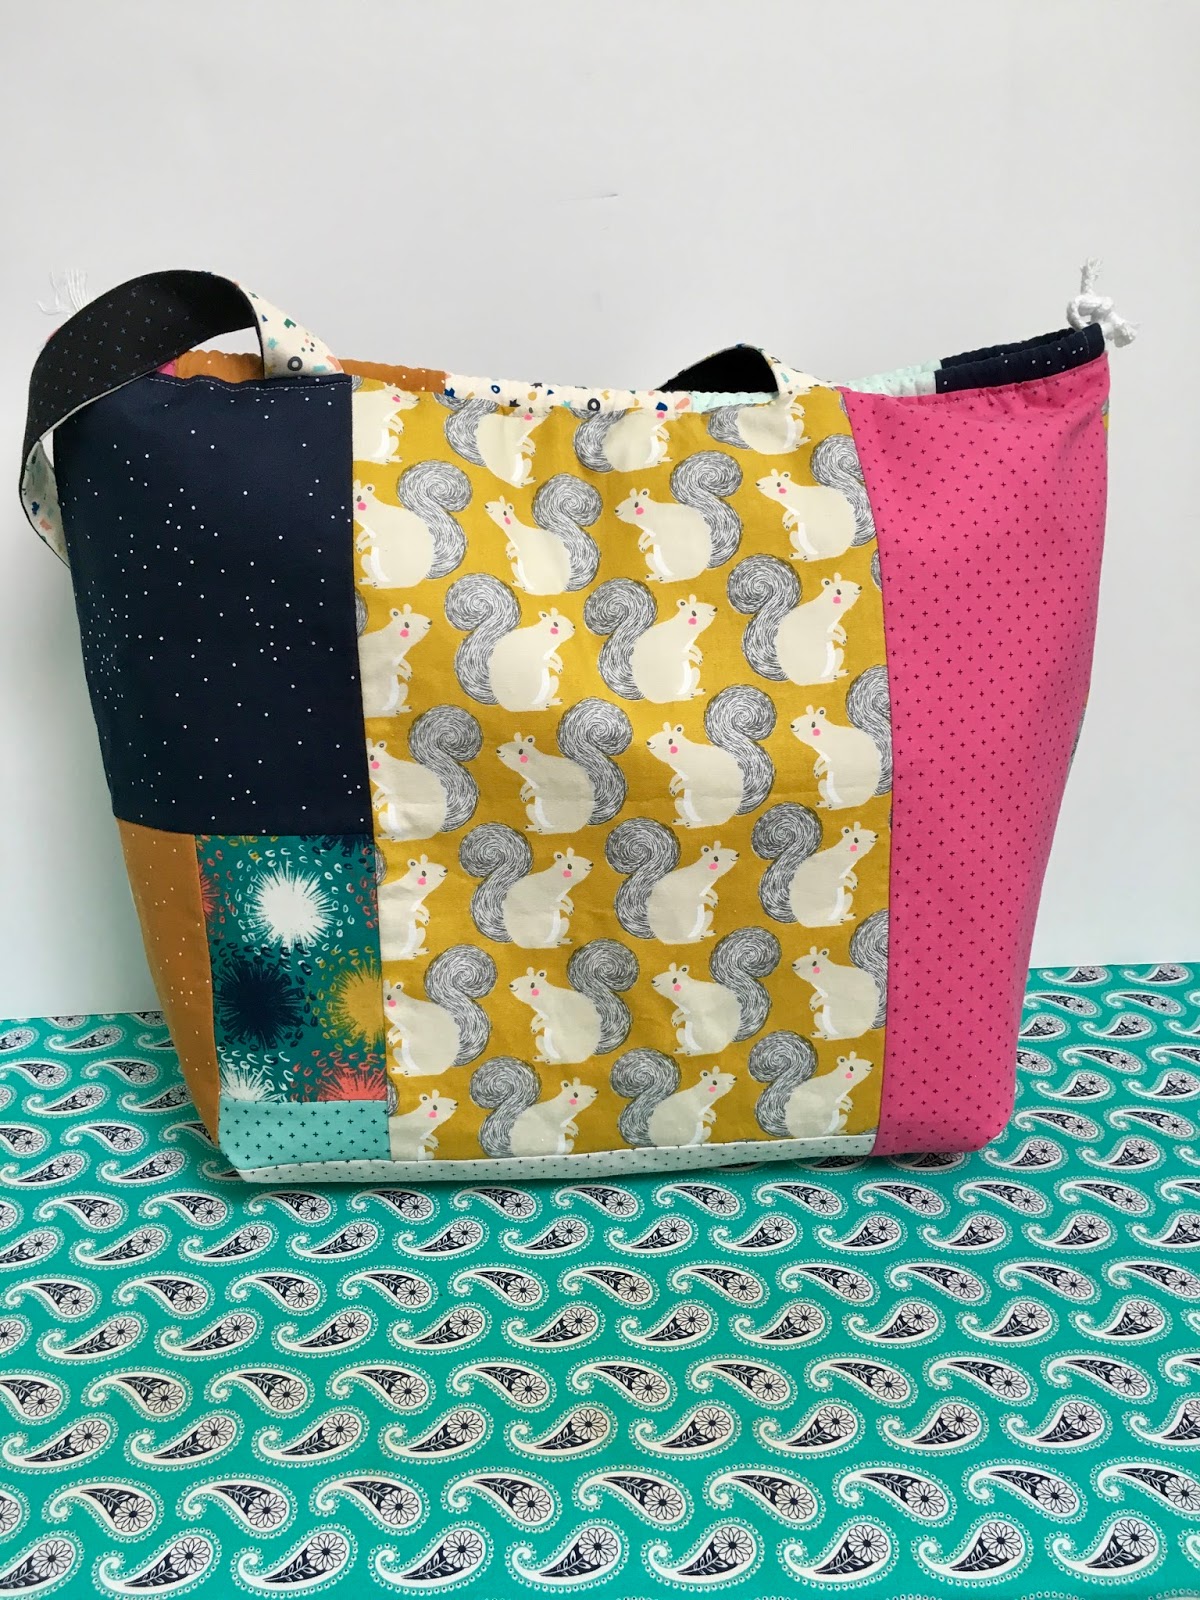 ellyn's place: Japanese knock off tote bag